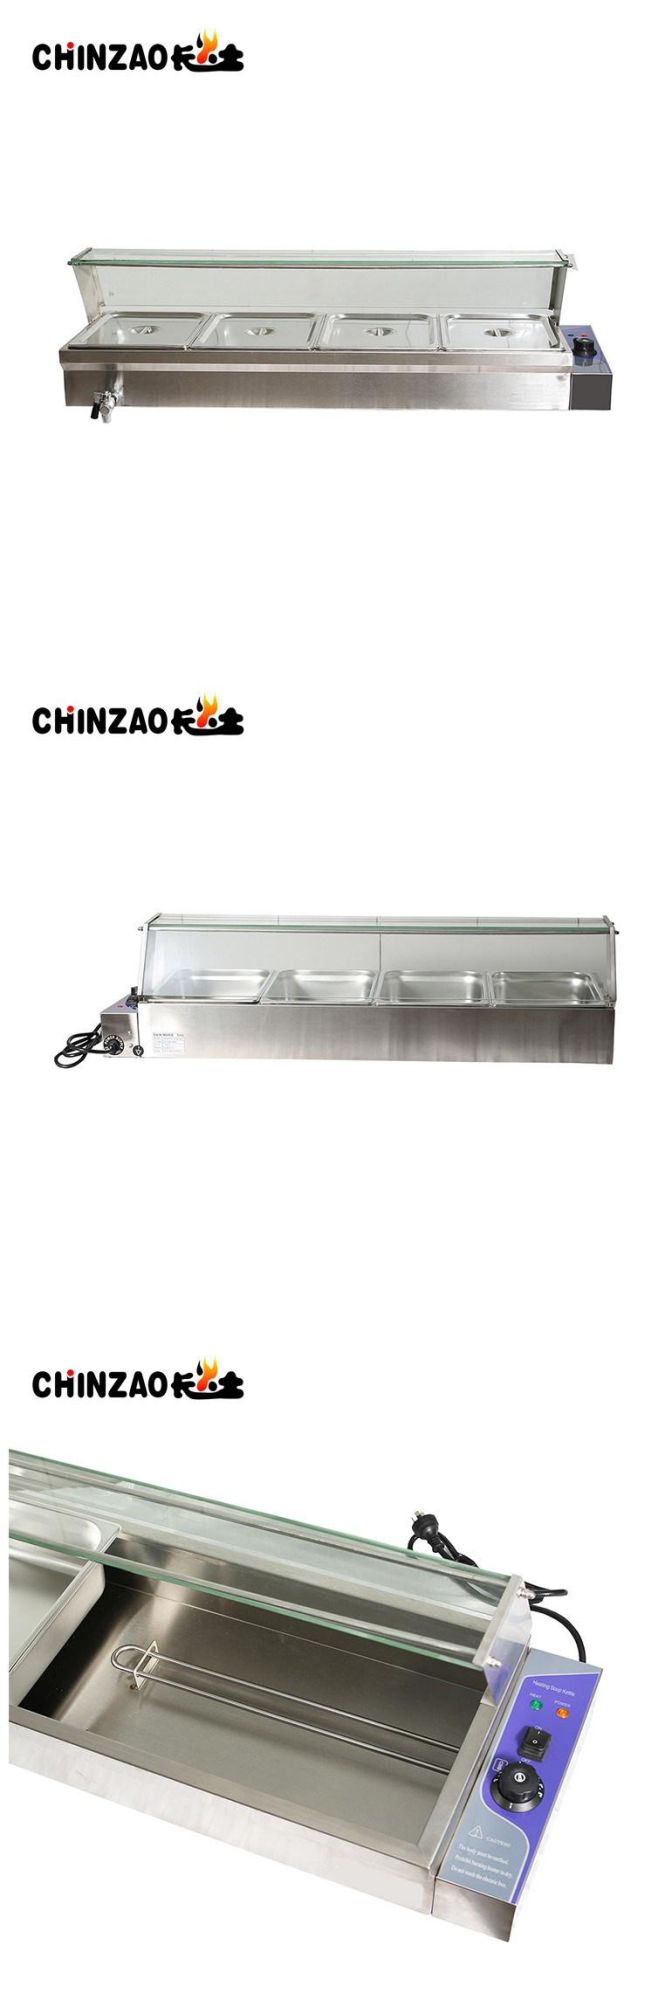 Electric Hot Food Warmer Showcase Bain Marie with Glass Cover